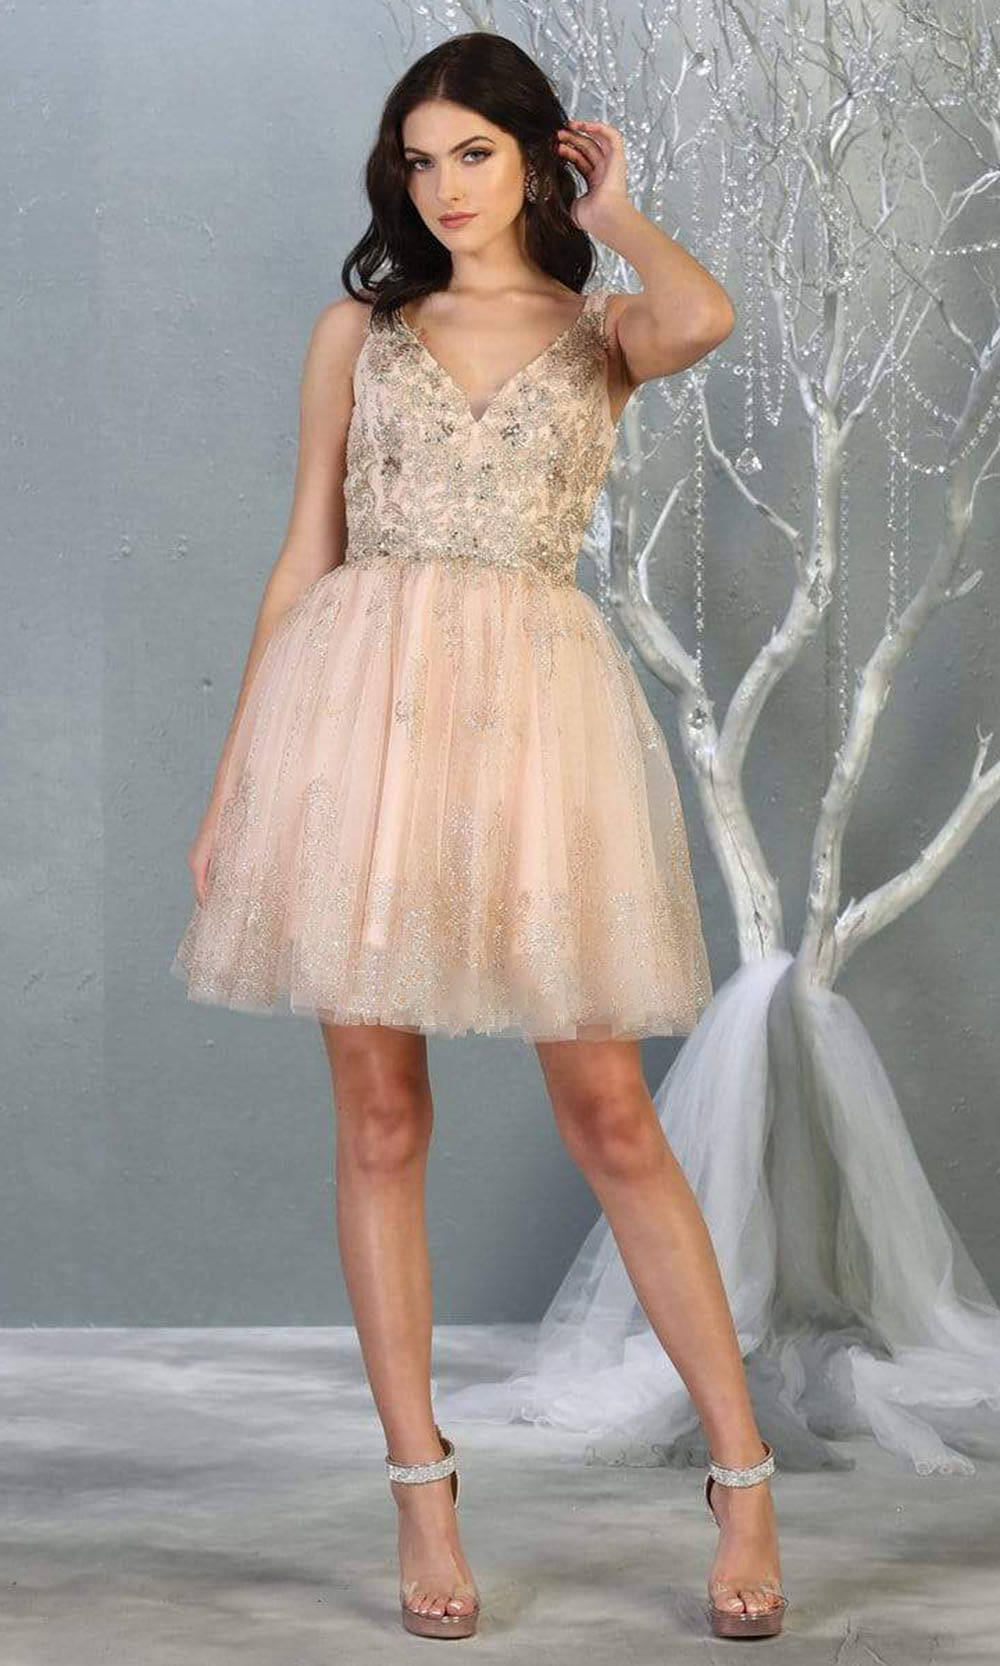 May Queen - MQ1817SC Beaded and Glittered Tulle Short Dress In Pink and Neutral